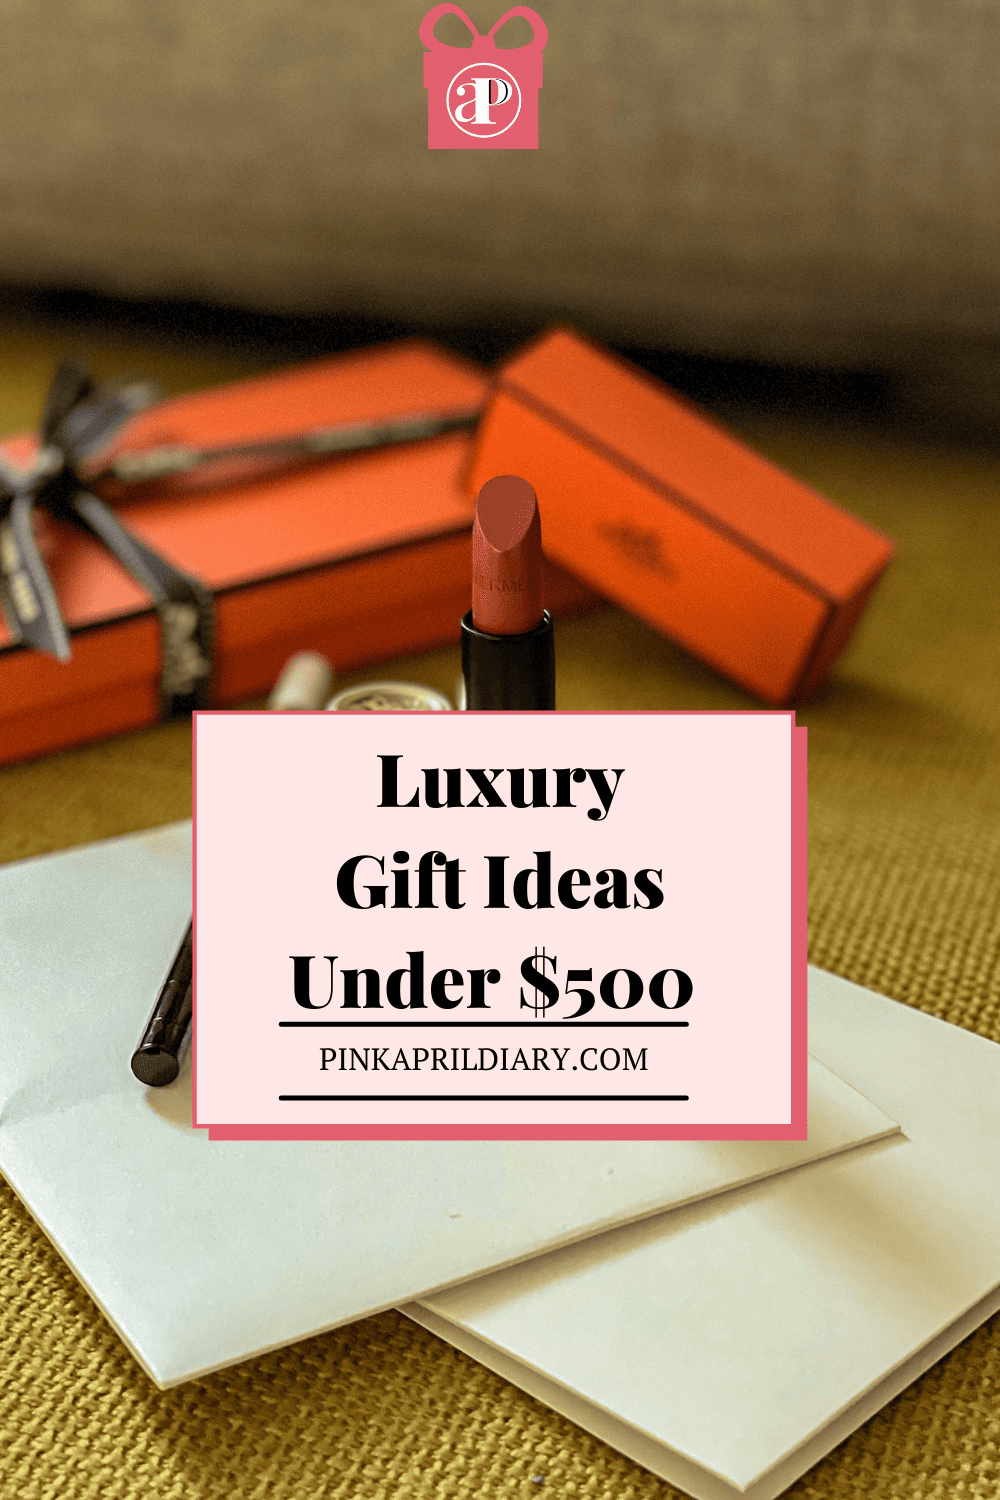 A Little Luxury for Holiday - Luxury Gifts Under $500